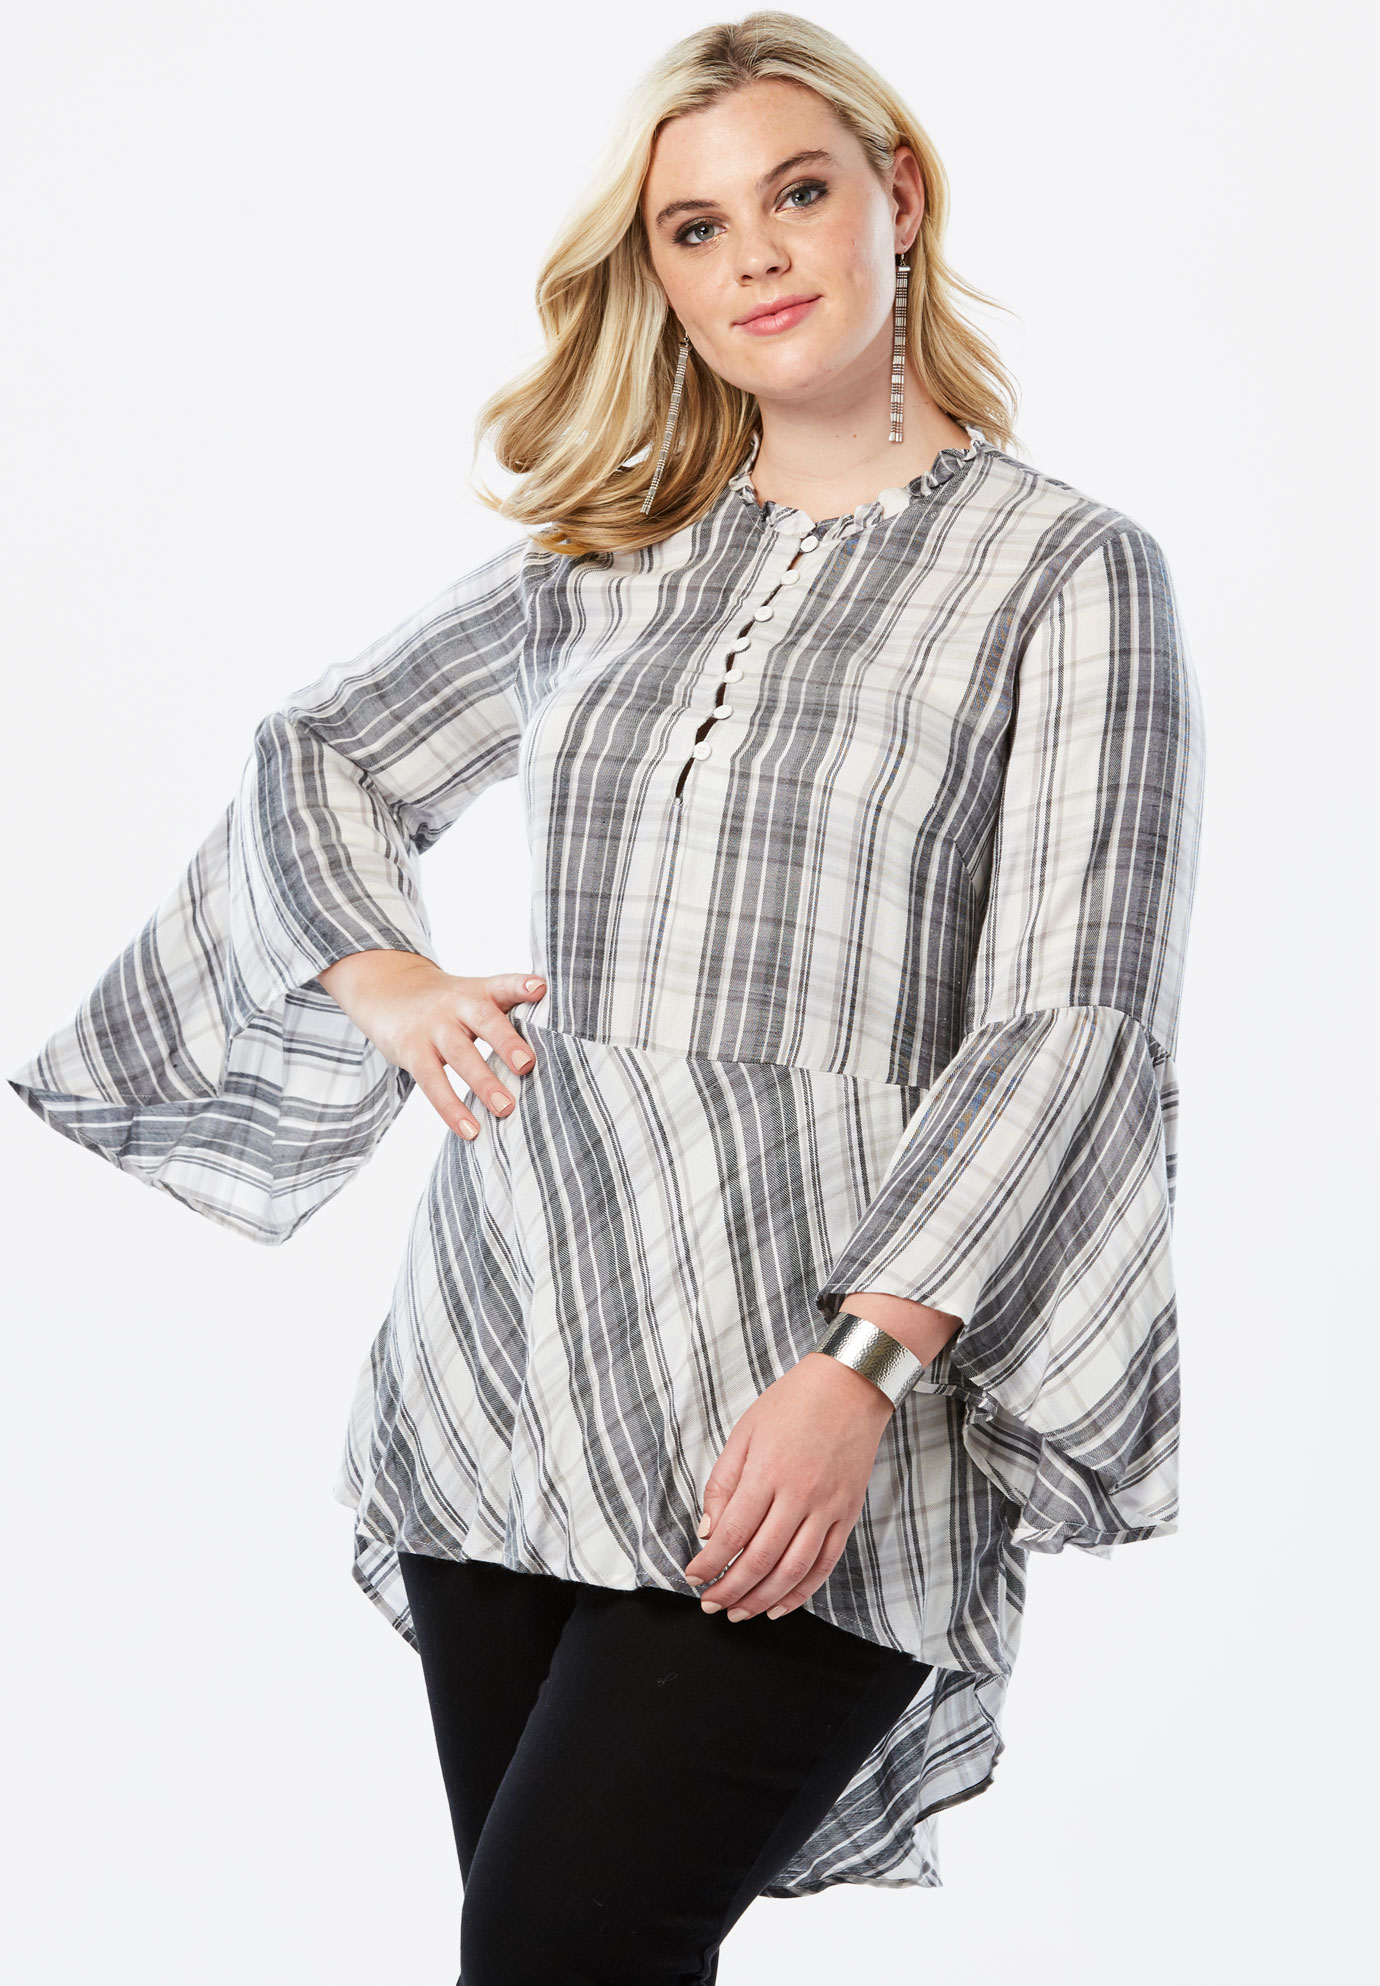 Ruffle Plaid Tunic with Bell Sleeves | Fullbeauty Outlet